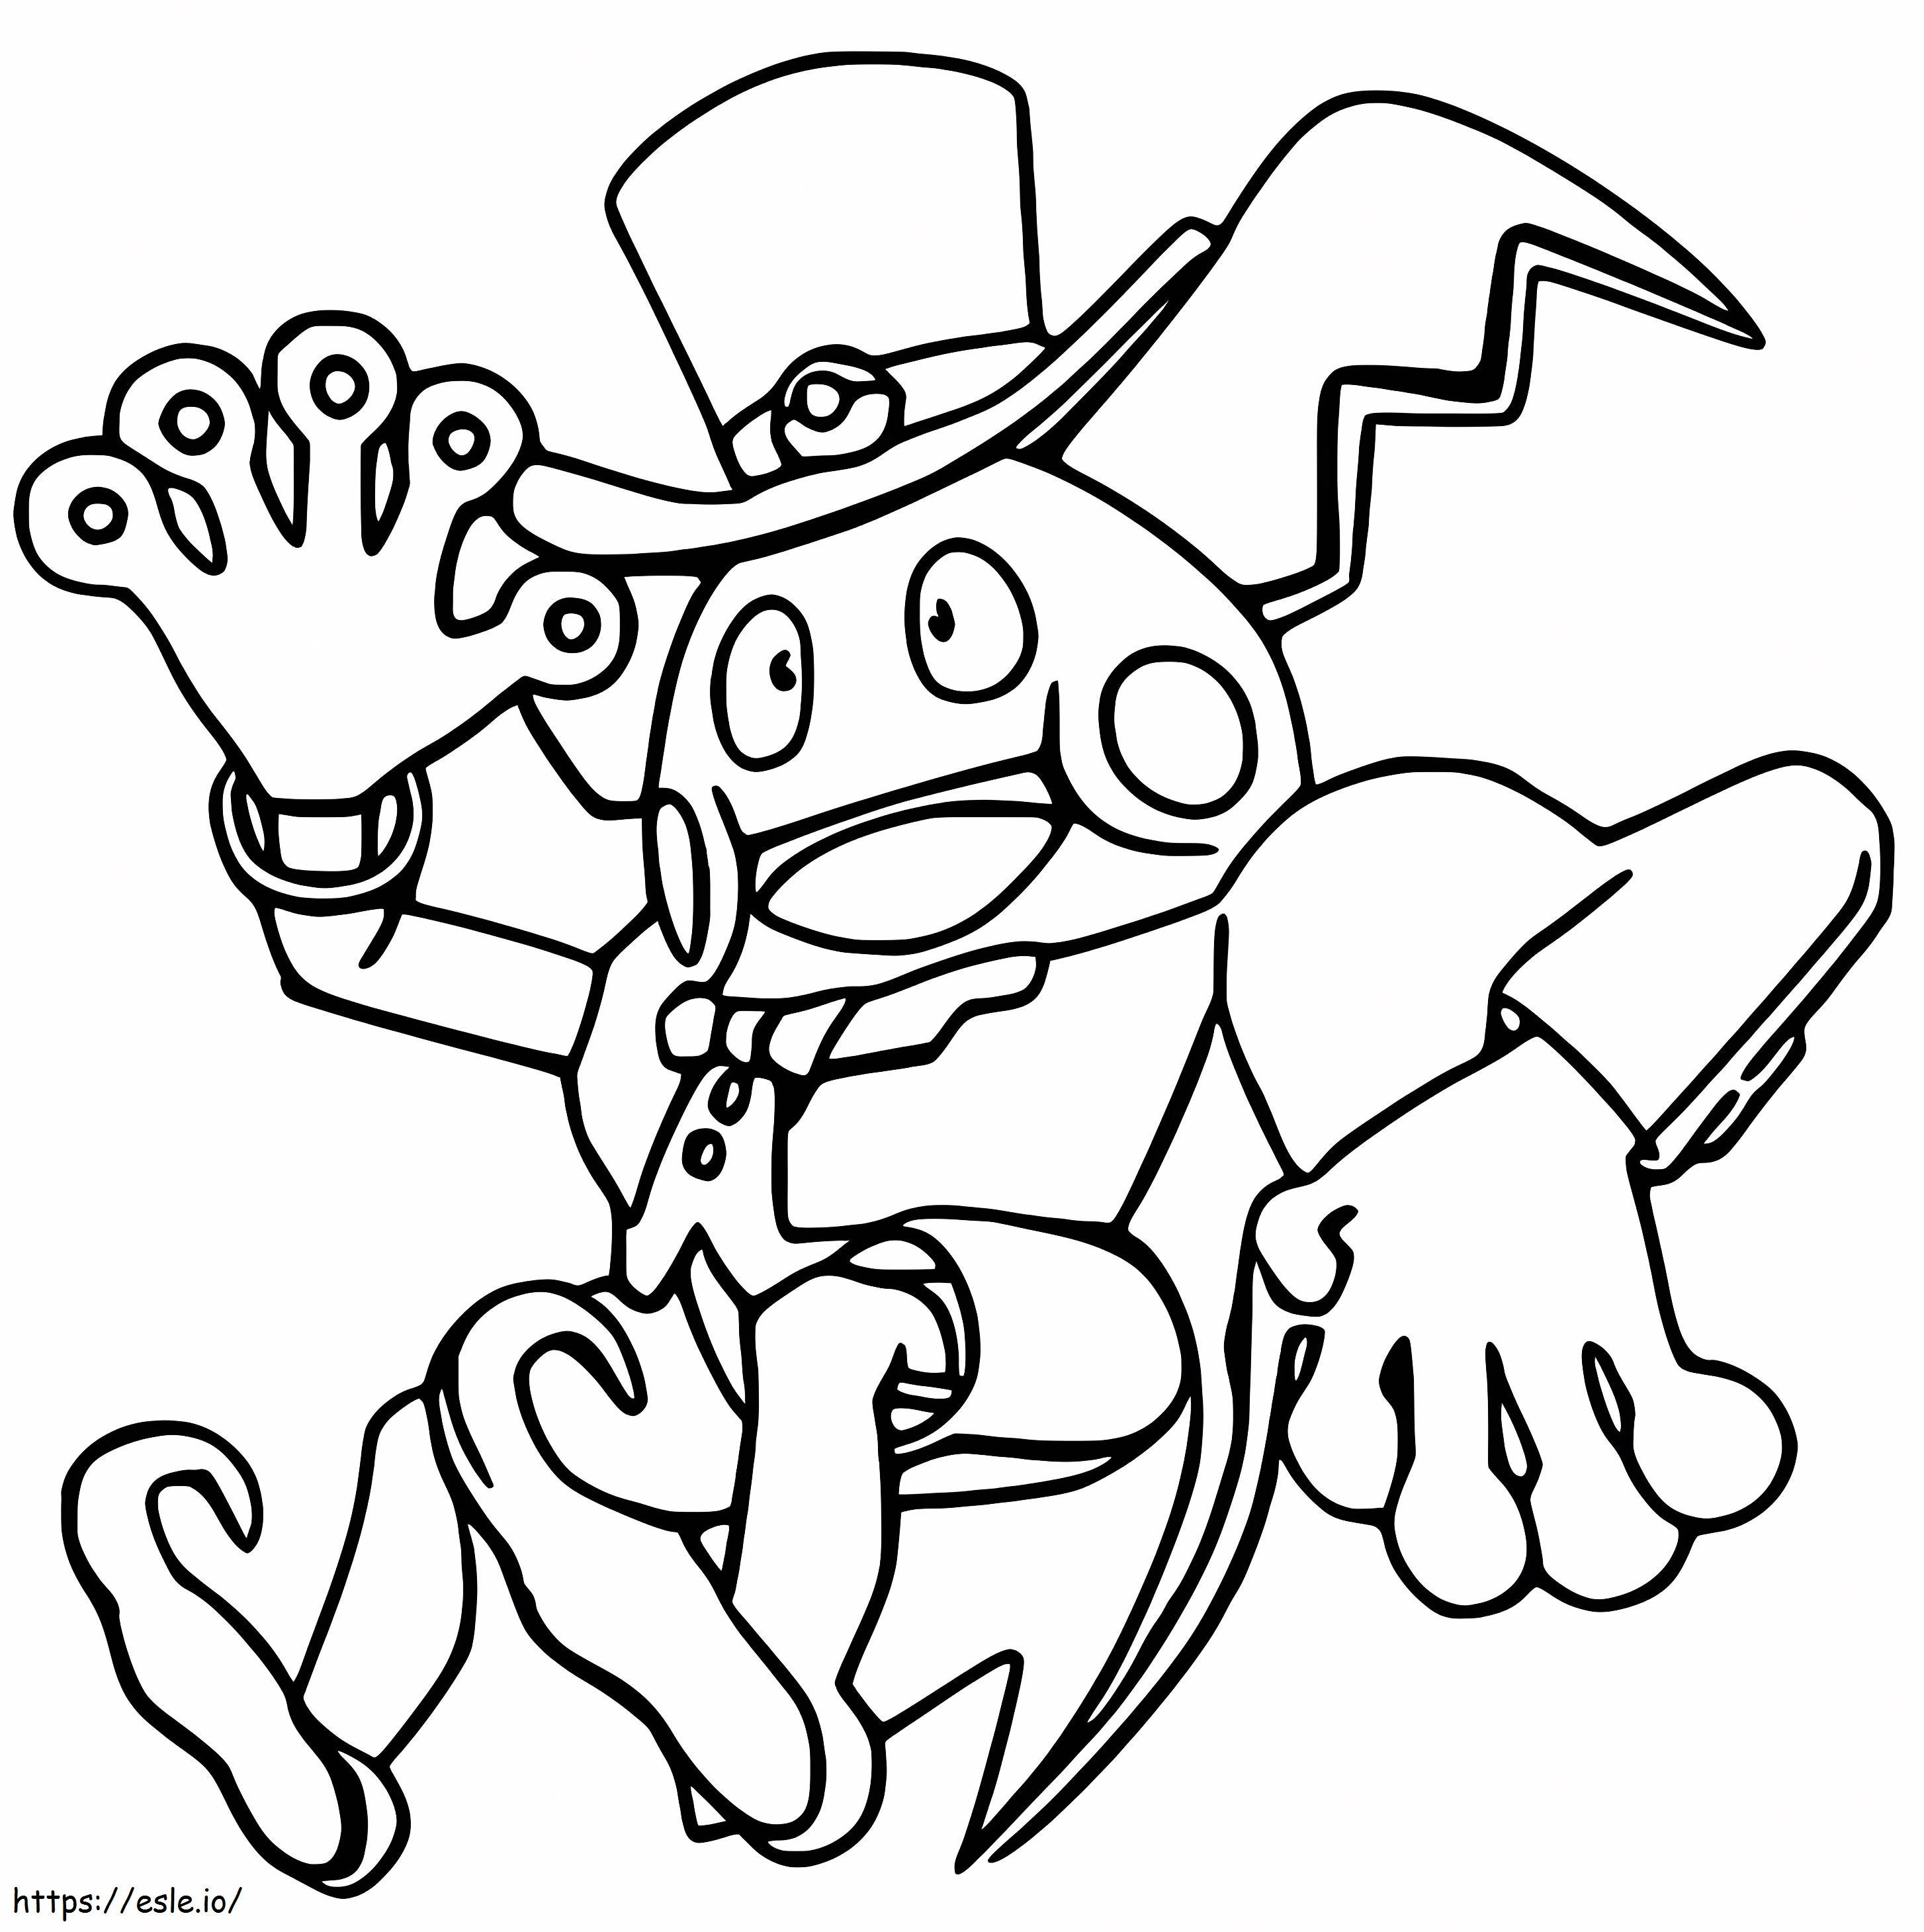 Magician Mr. Mime coloring page